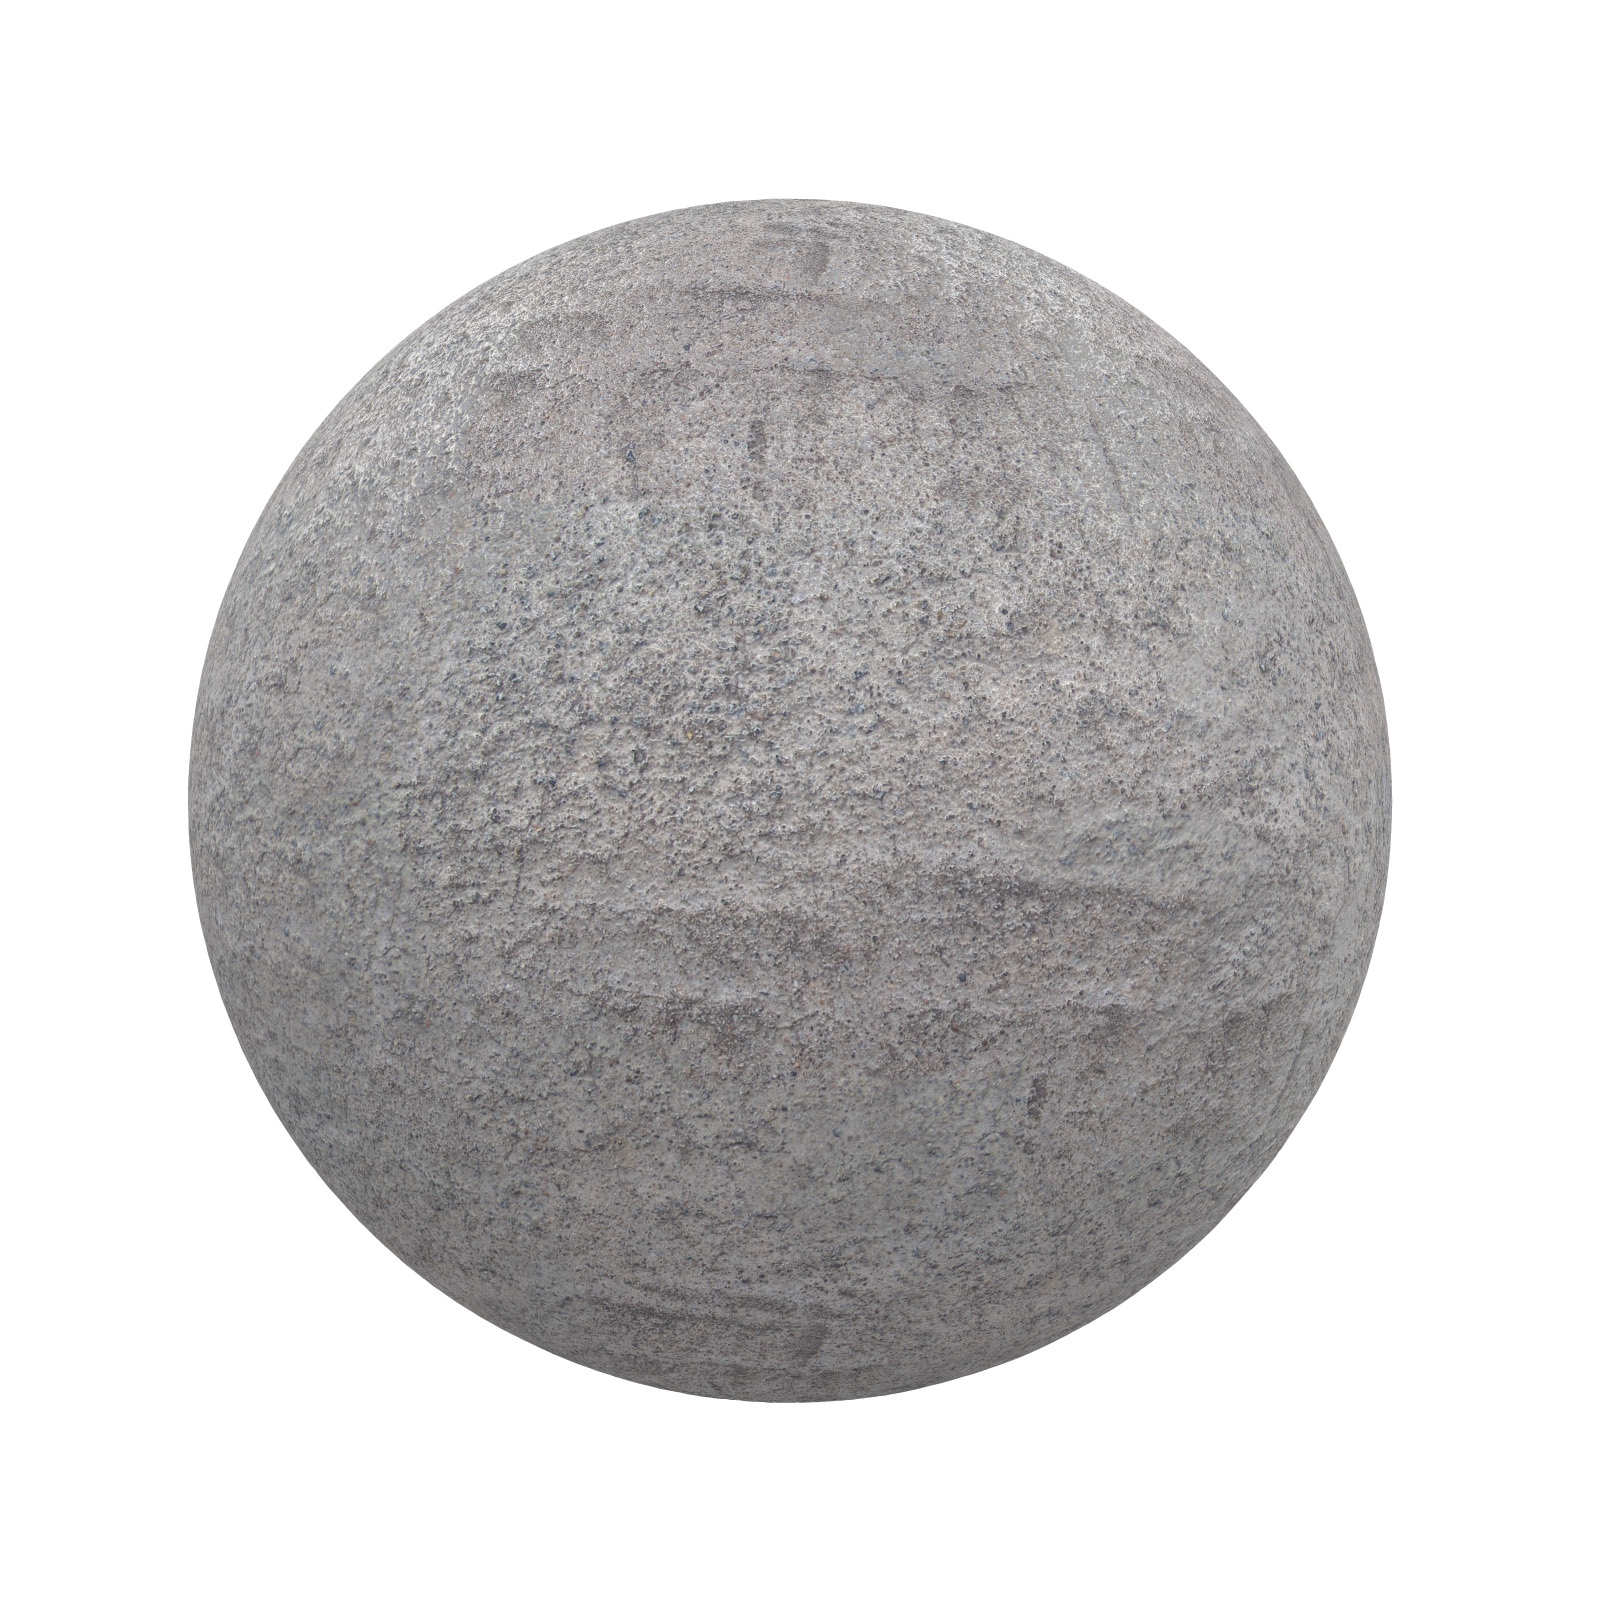 TEXTURES – STONES – CGAxis PBR Colection Vol 1 Stones – grey stone 1 - thumbnail 1